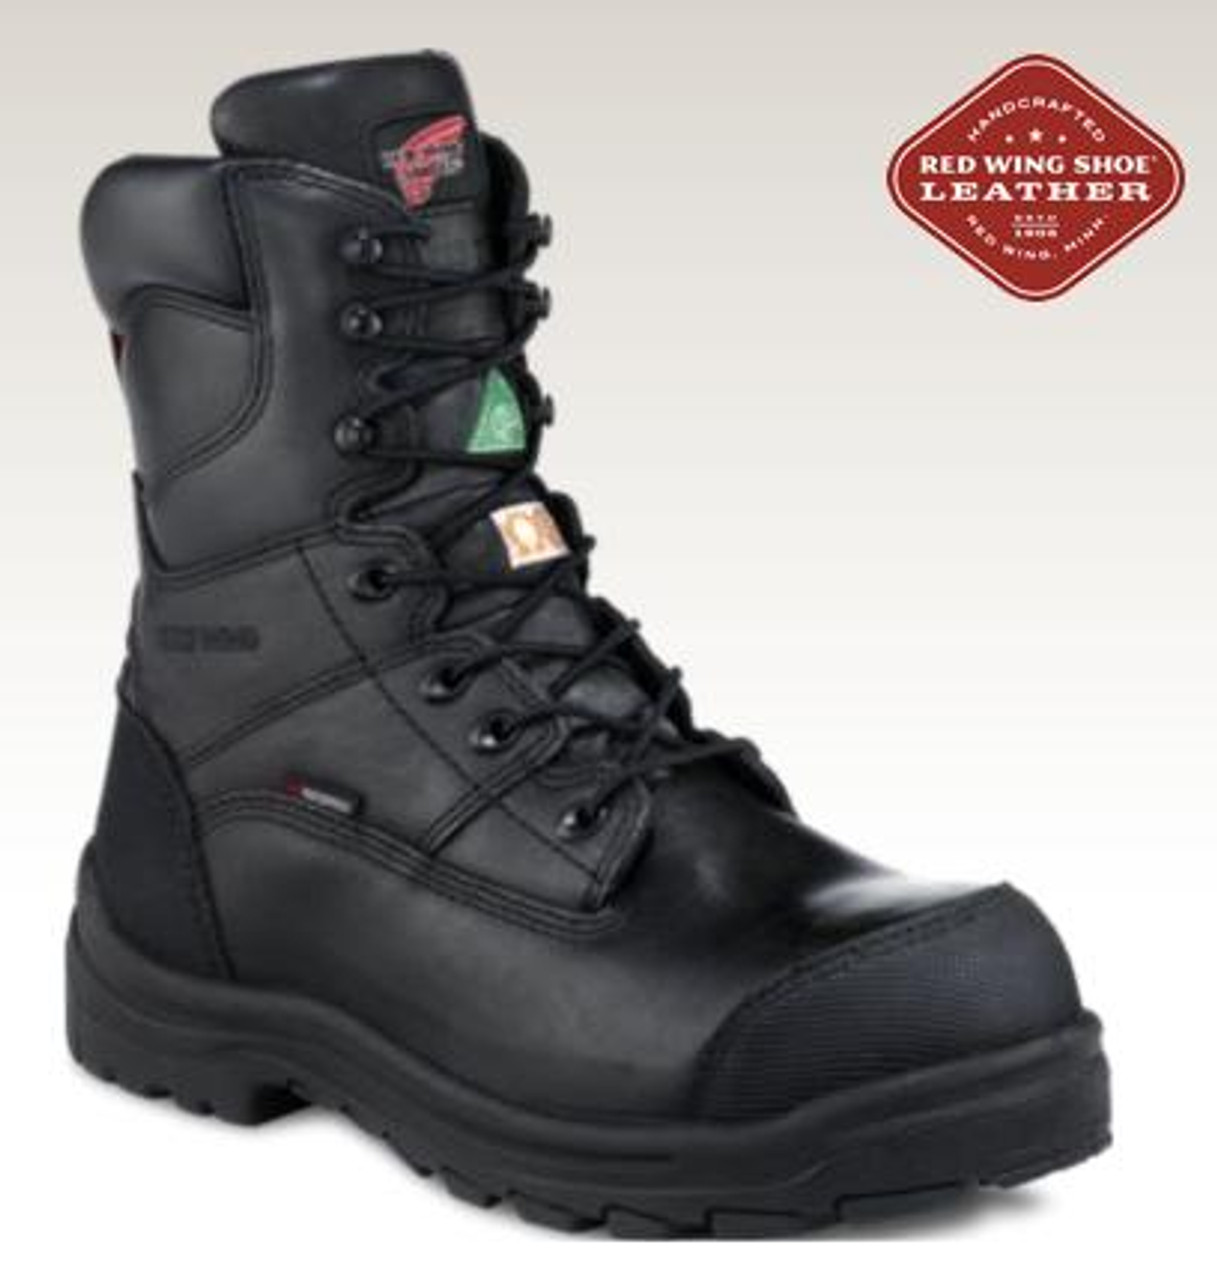 black and red work boots